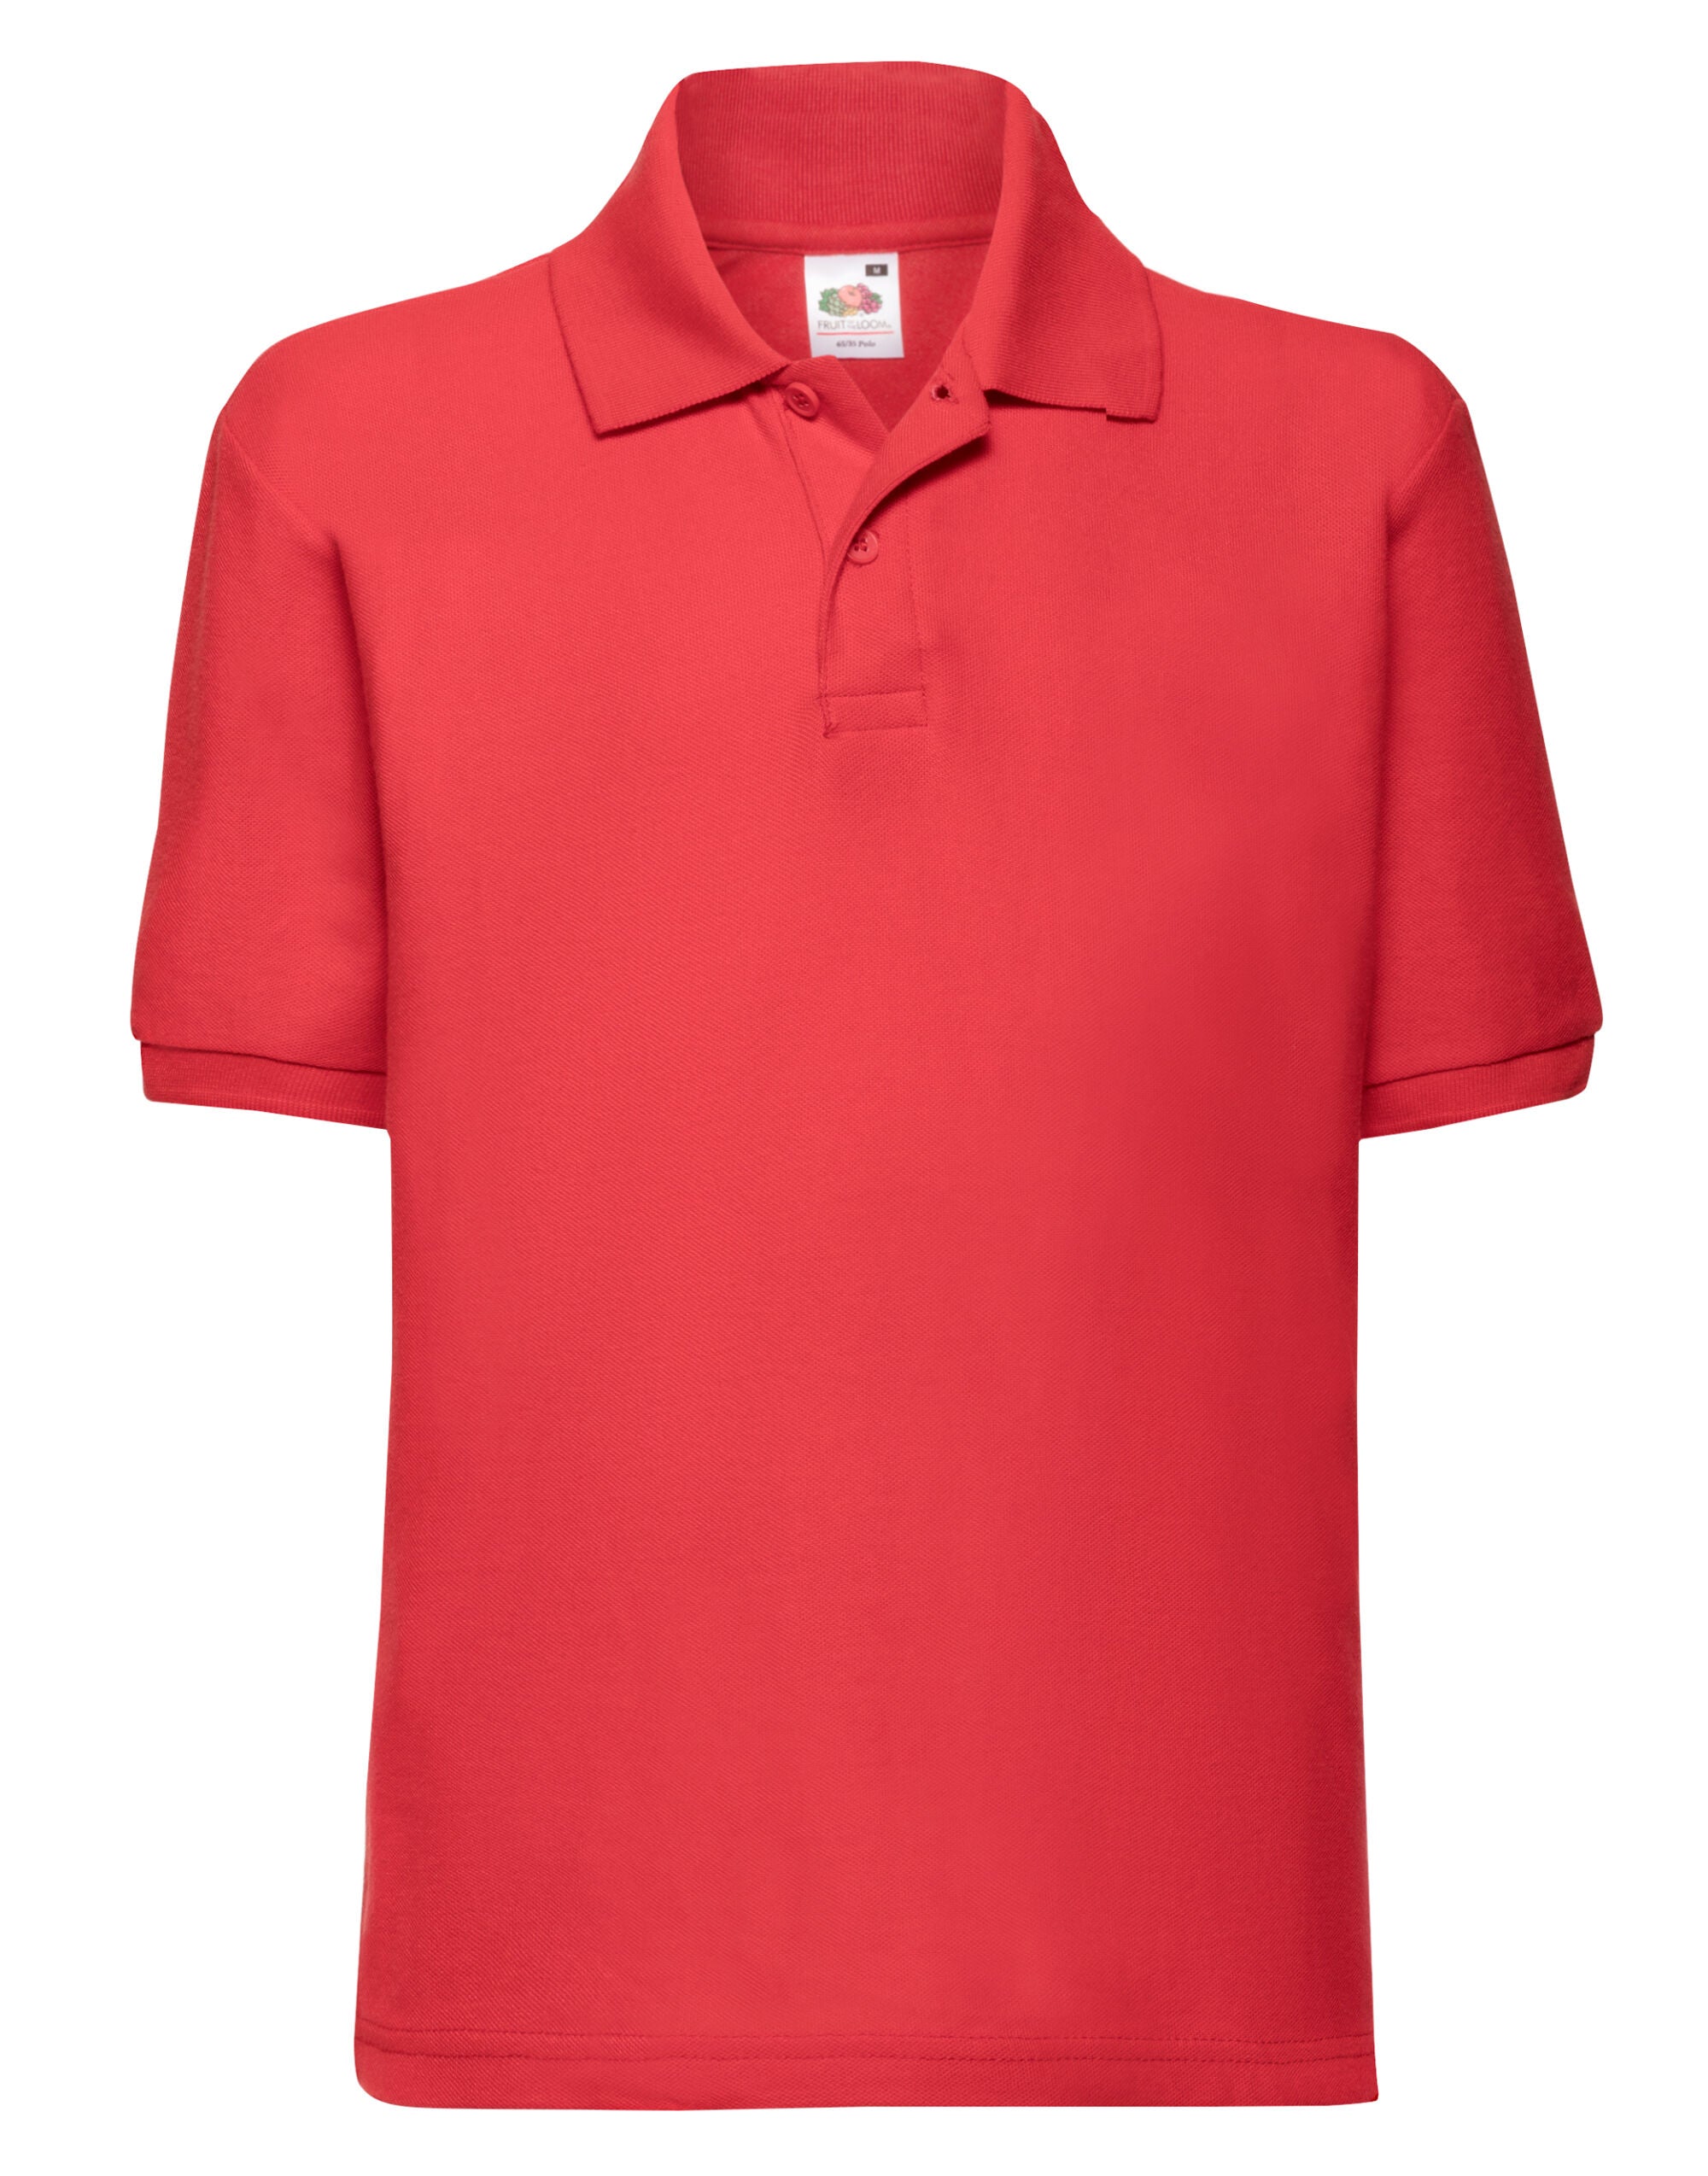 Fruit Of The Loom Kid's 65/35 Polo Guaranteed to perform at 60&deg; wash (63417)